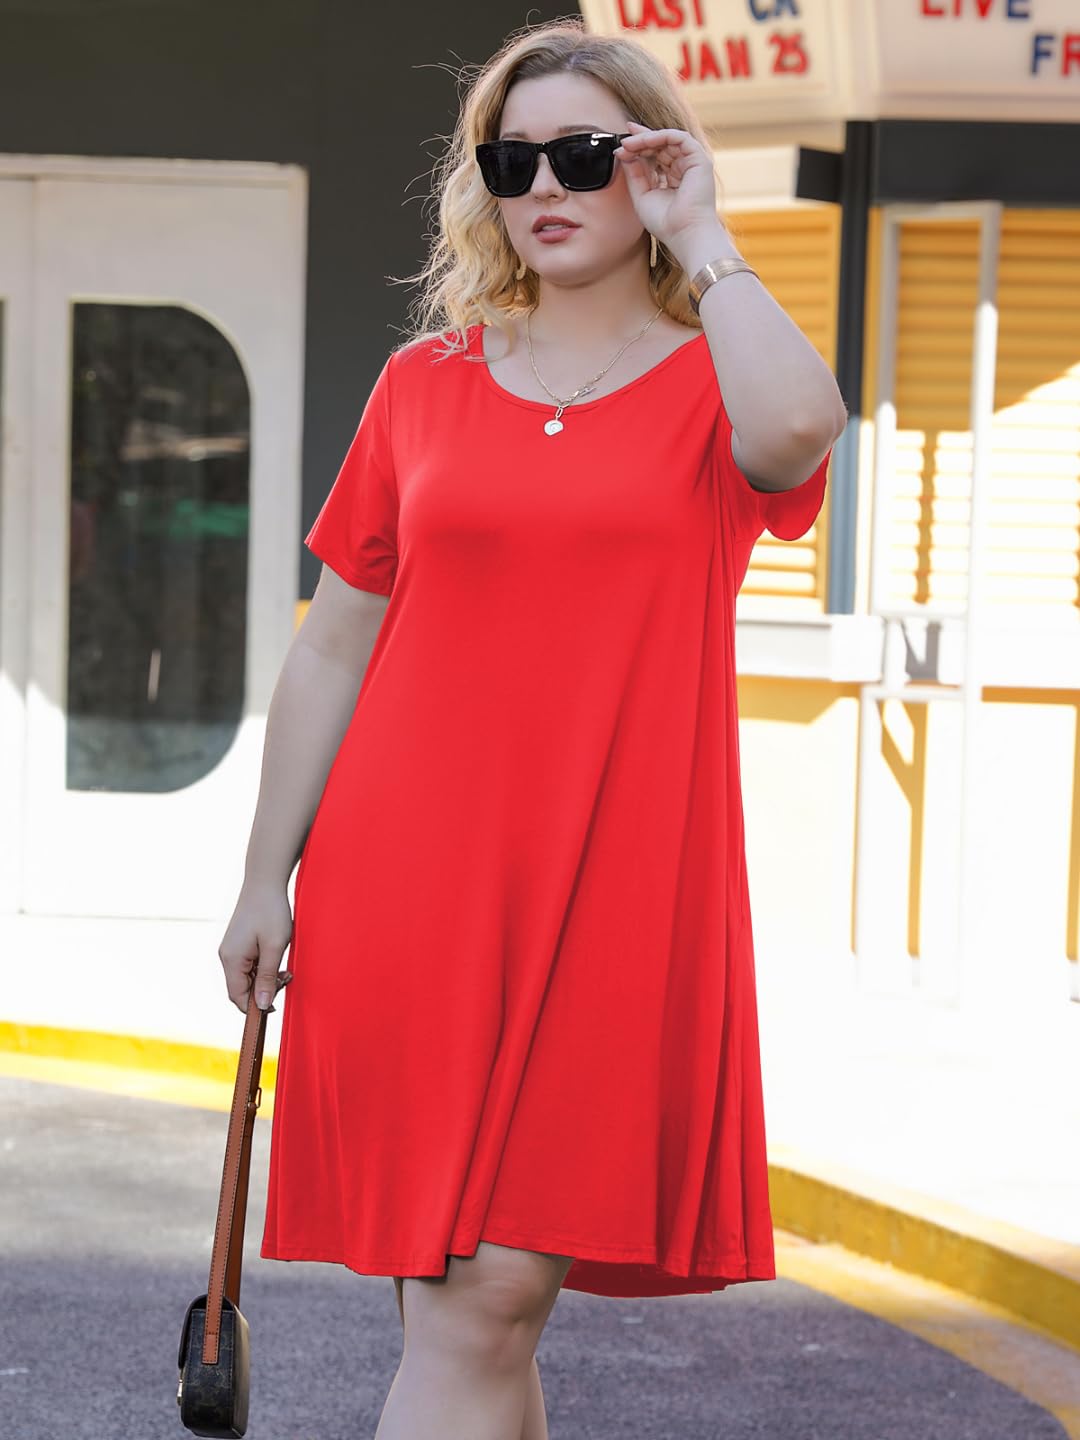 JollieLovin Women's Casual Swing Loose T-Shirt Dress Summer Short Sleeve Dresses with Pockets (Available in Plus Size)